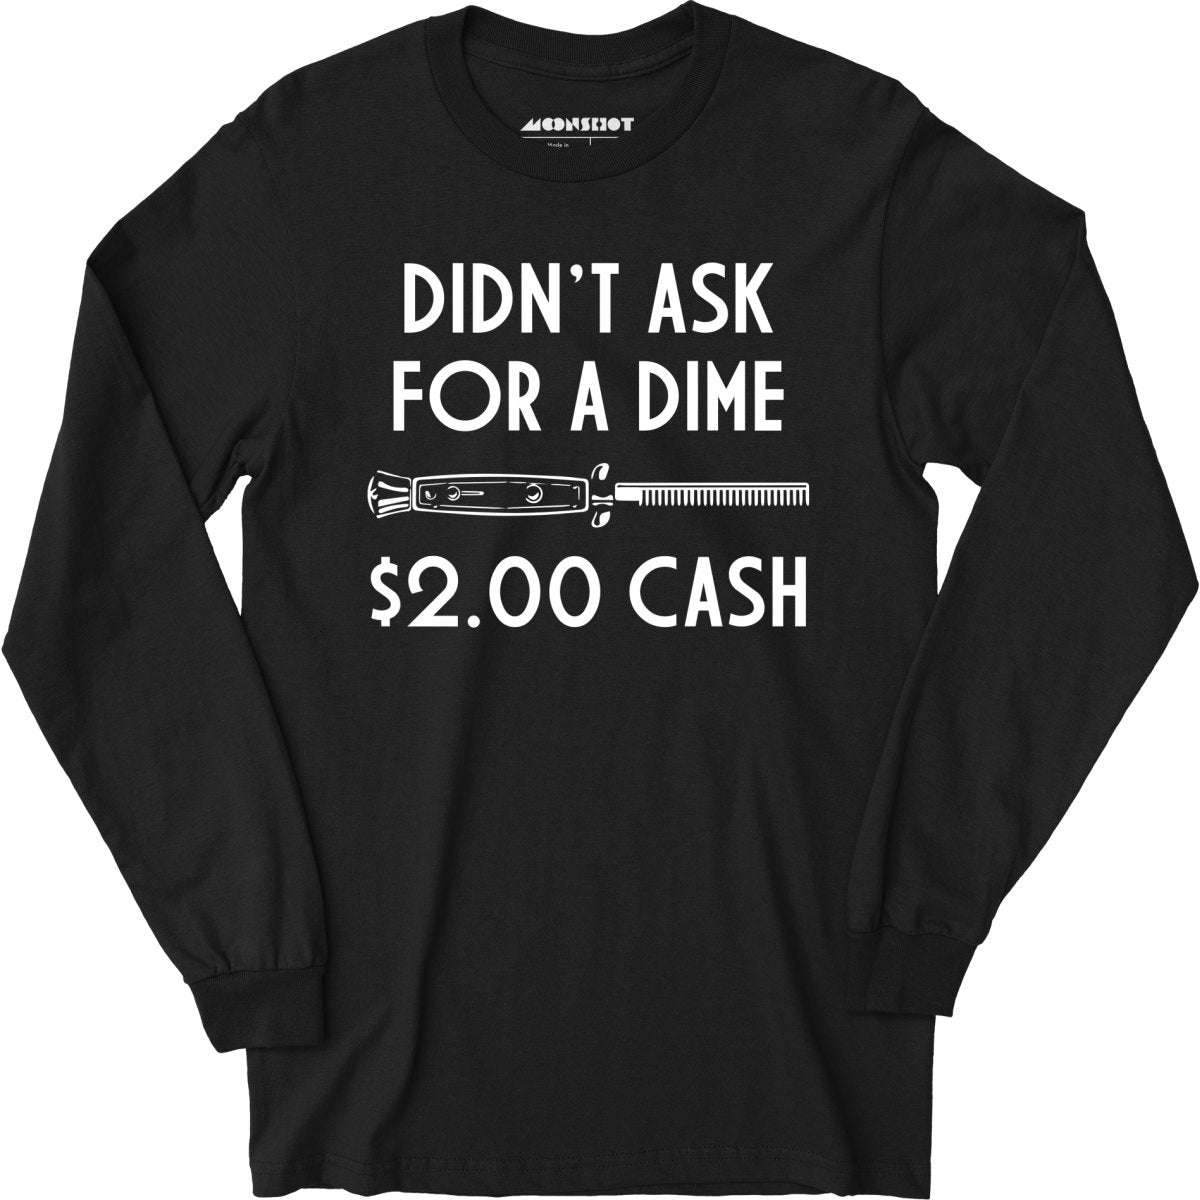 Didn't Ask For a Dime - Long Sleeve T-Shirt